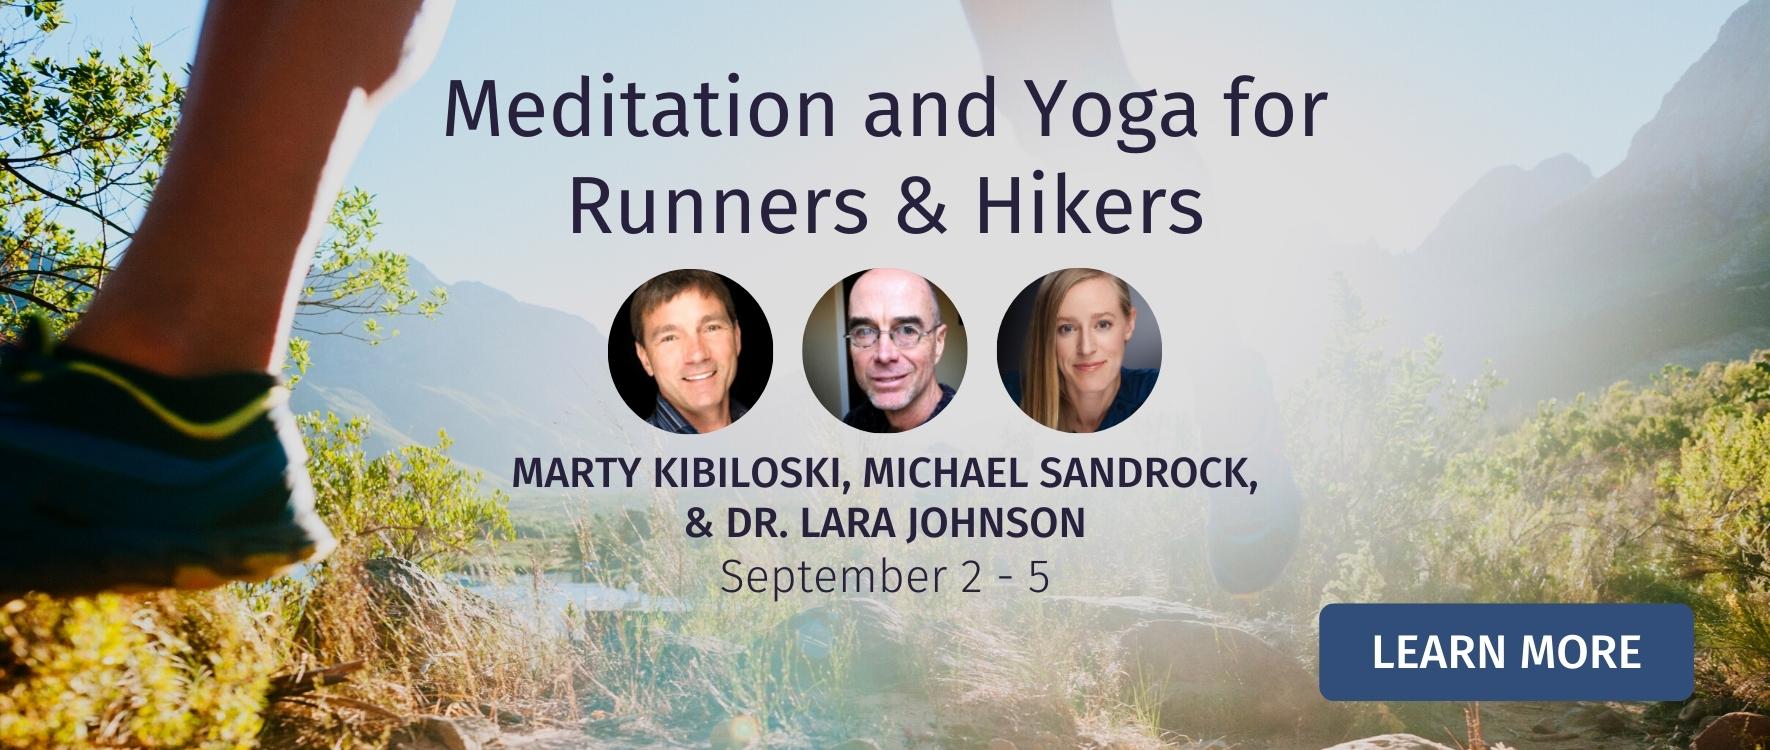 Meditation and Yoga for Runners & Hikers Labor Day Retreat at Drala Mountain Center